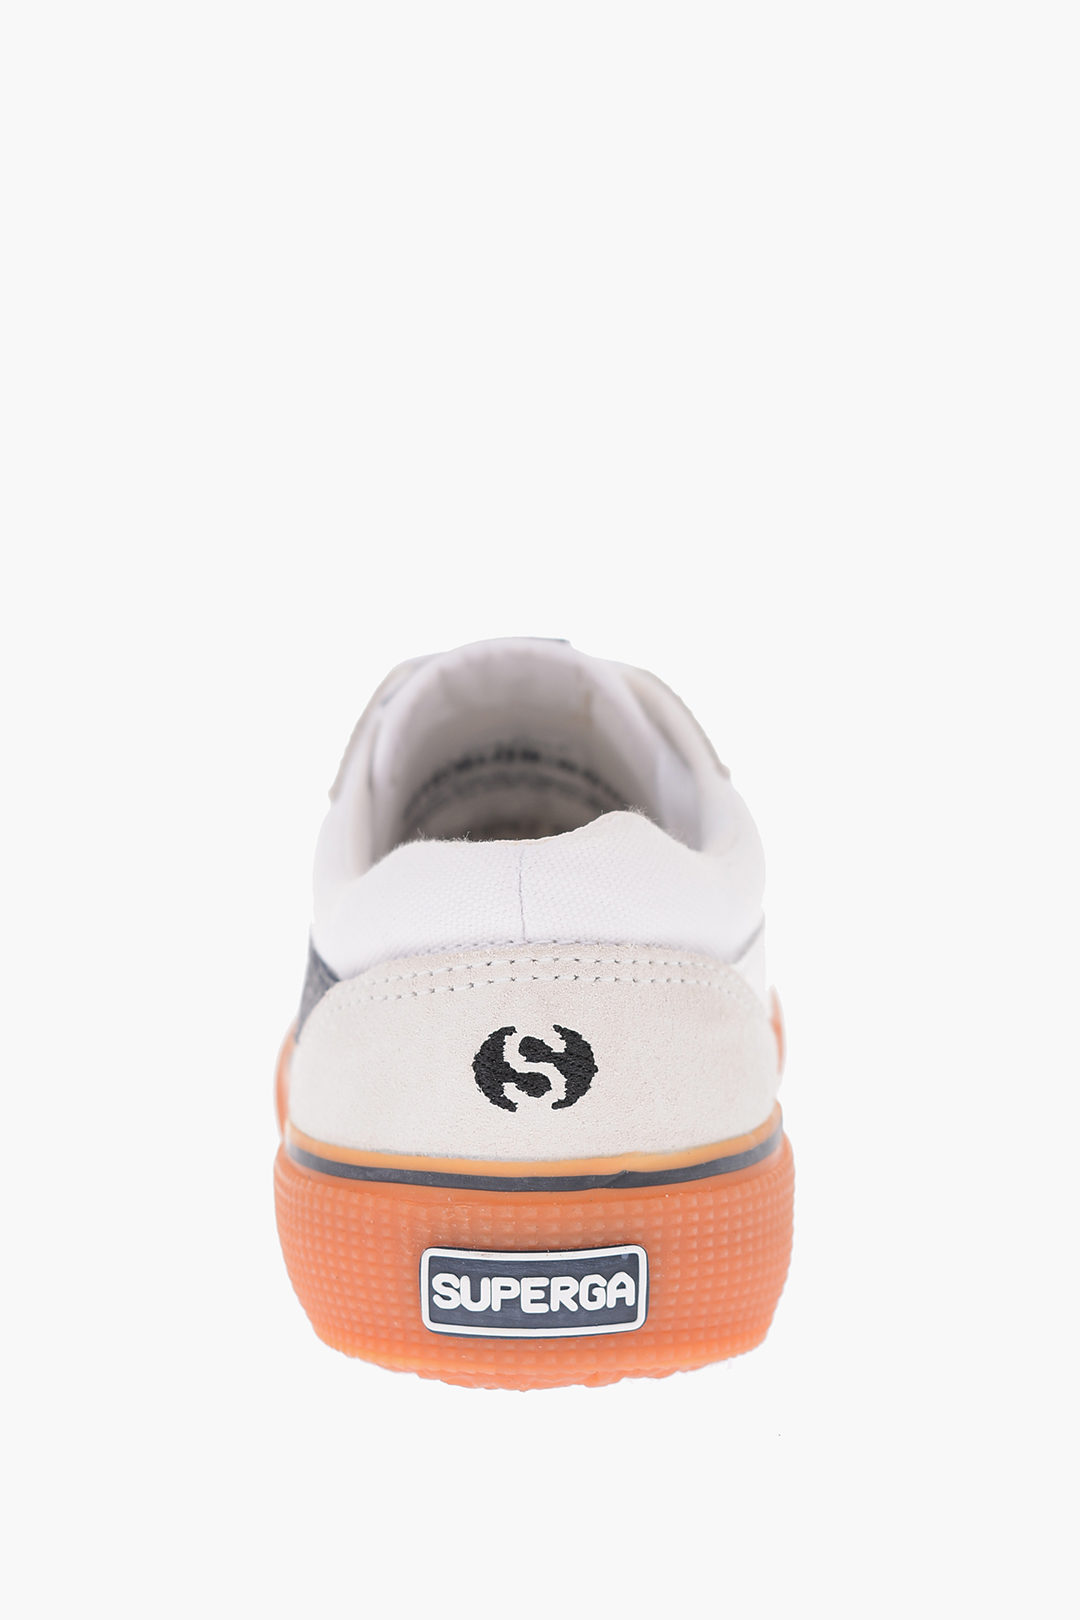 Reebok Launches Limited-Edition Sneaker Via Voice-Enabled Devices |  Consumer Goods Technology